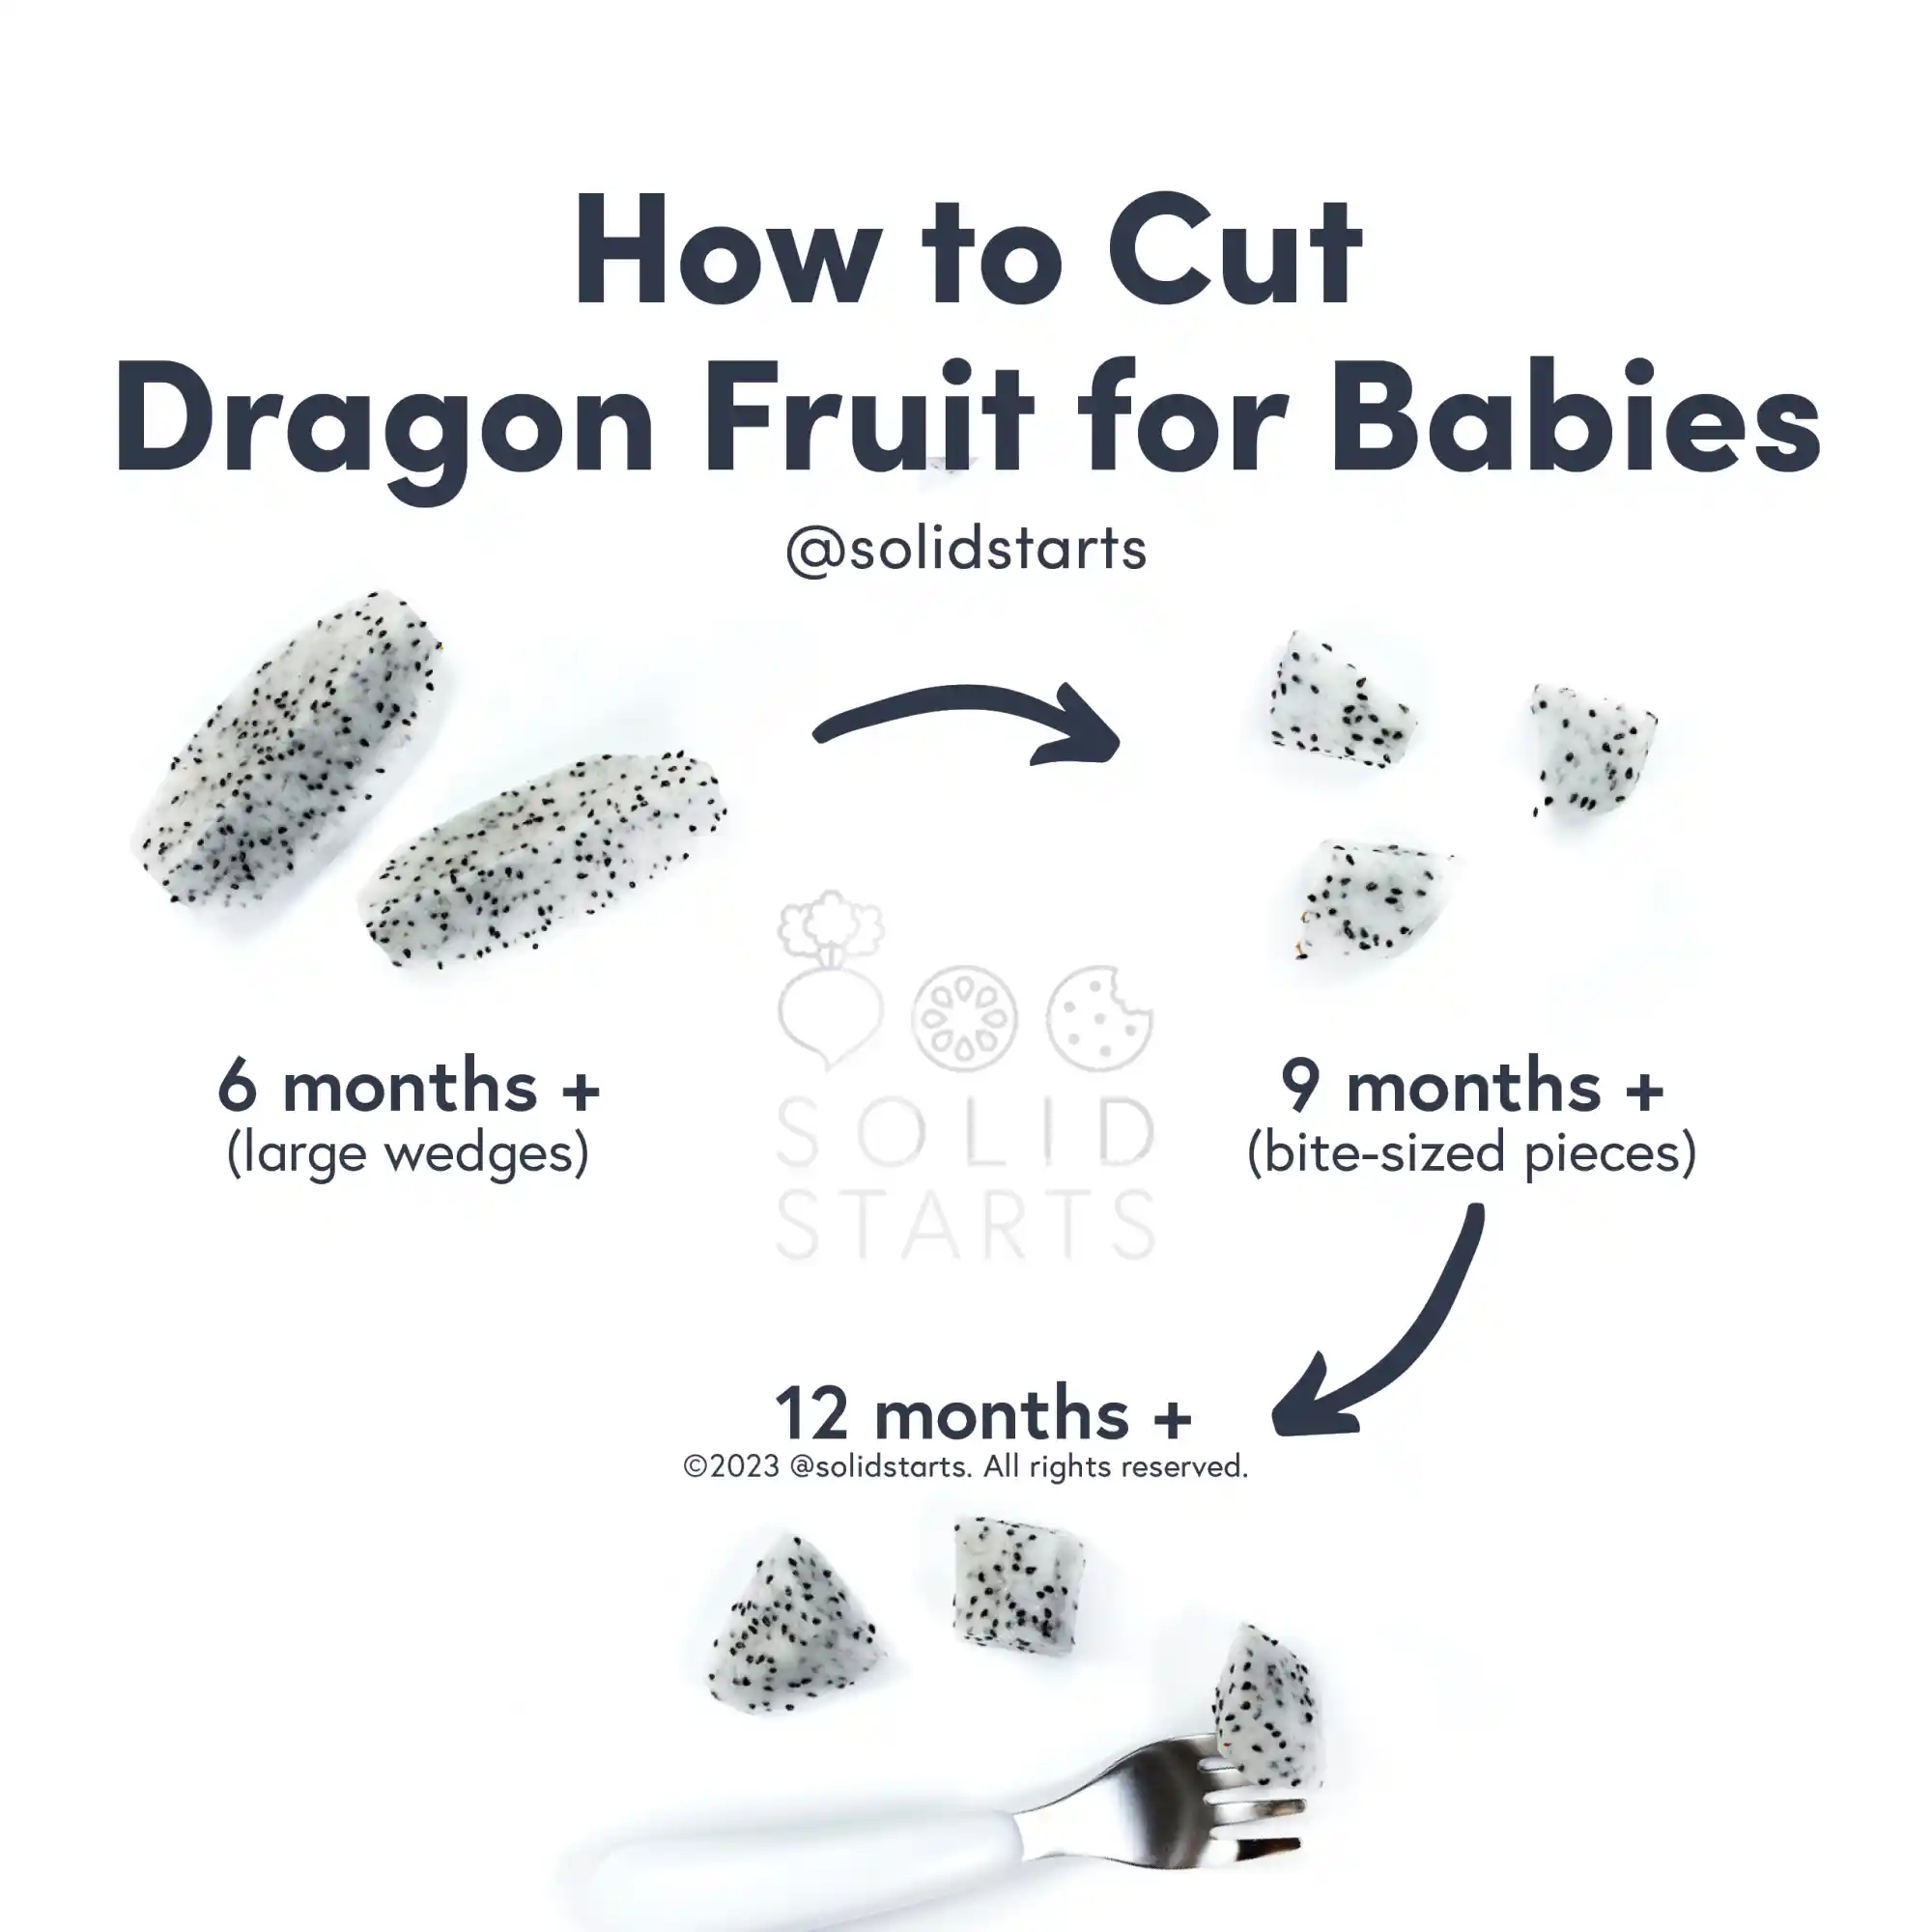 a Solid Starts infographic with the header How to Cut Dragon Fruit for Babies: large wedges for 6 months+, bite-sized pieces for 9 months+, and bite-sized pieces with a fork for 12 months+